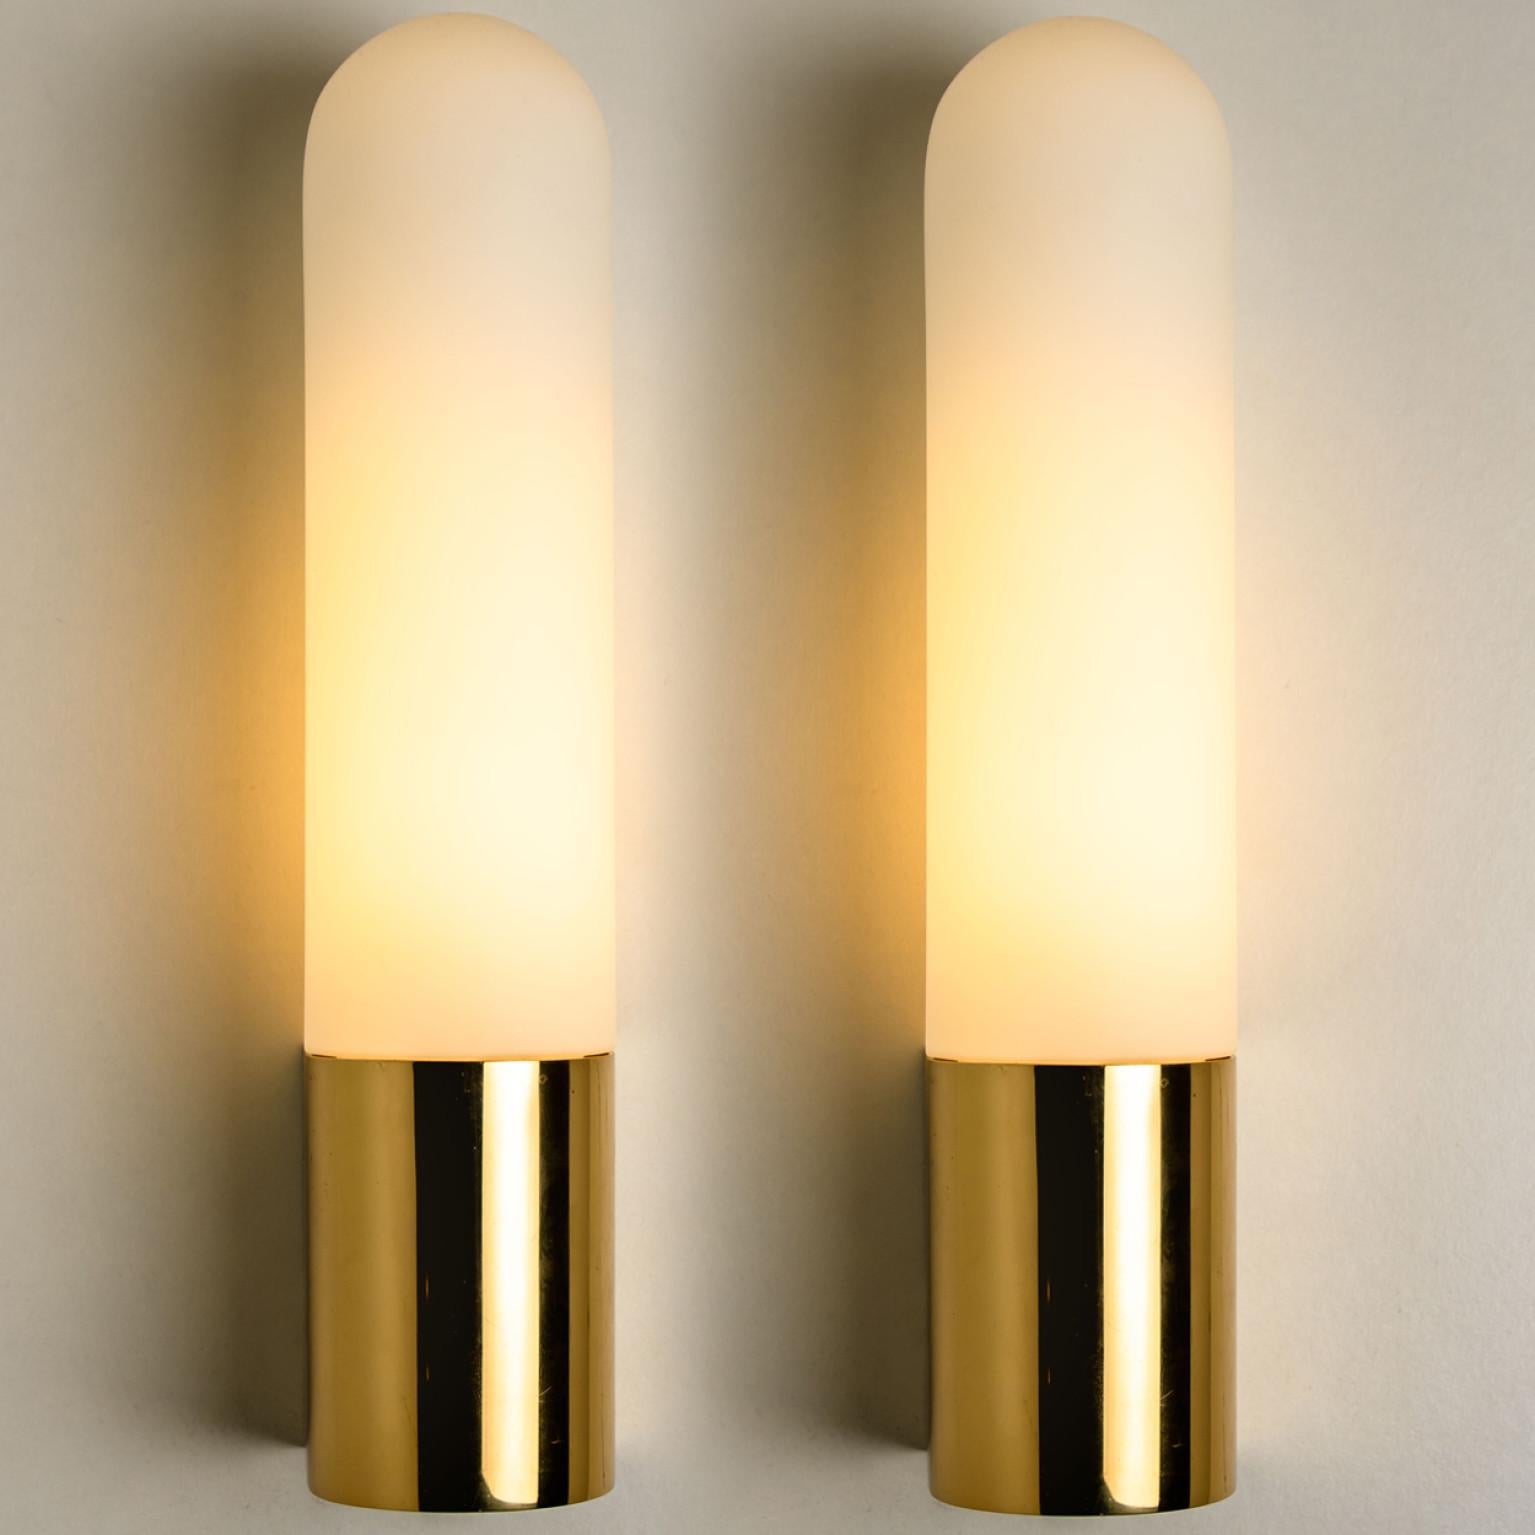 Other Several Opaque Glass / Brass Wall Lights by Limburg, Germany, 1970s For Sale